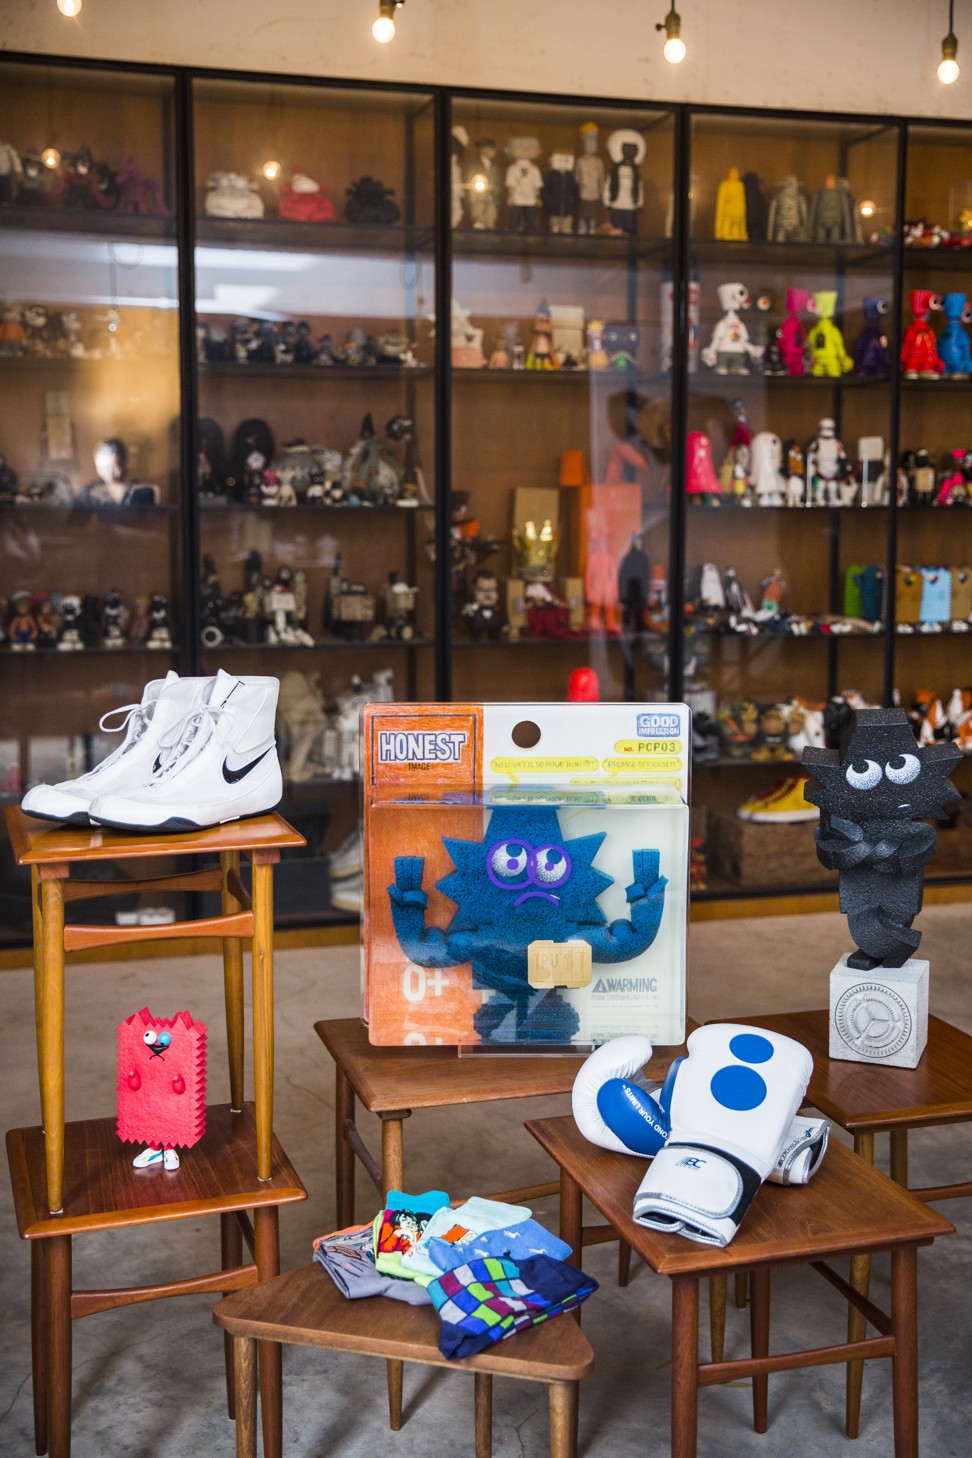 Boxing shoes by Nike Machomai, and boxing gloves by Colette x Body Cross are part of Lau’s eclectic collection. Photo: Michelle Wong